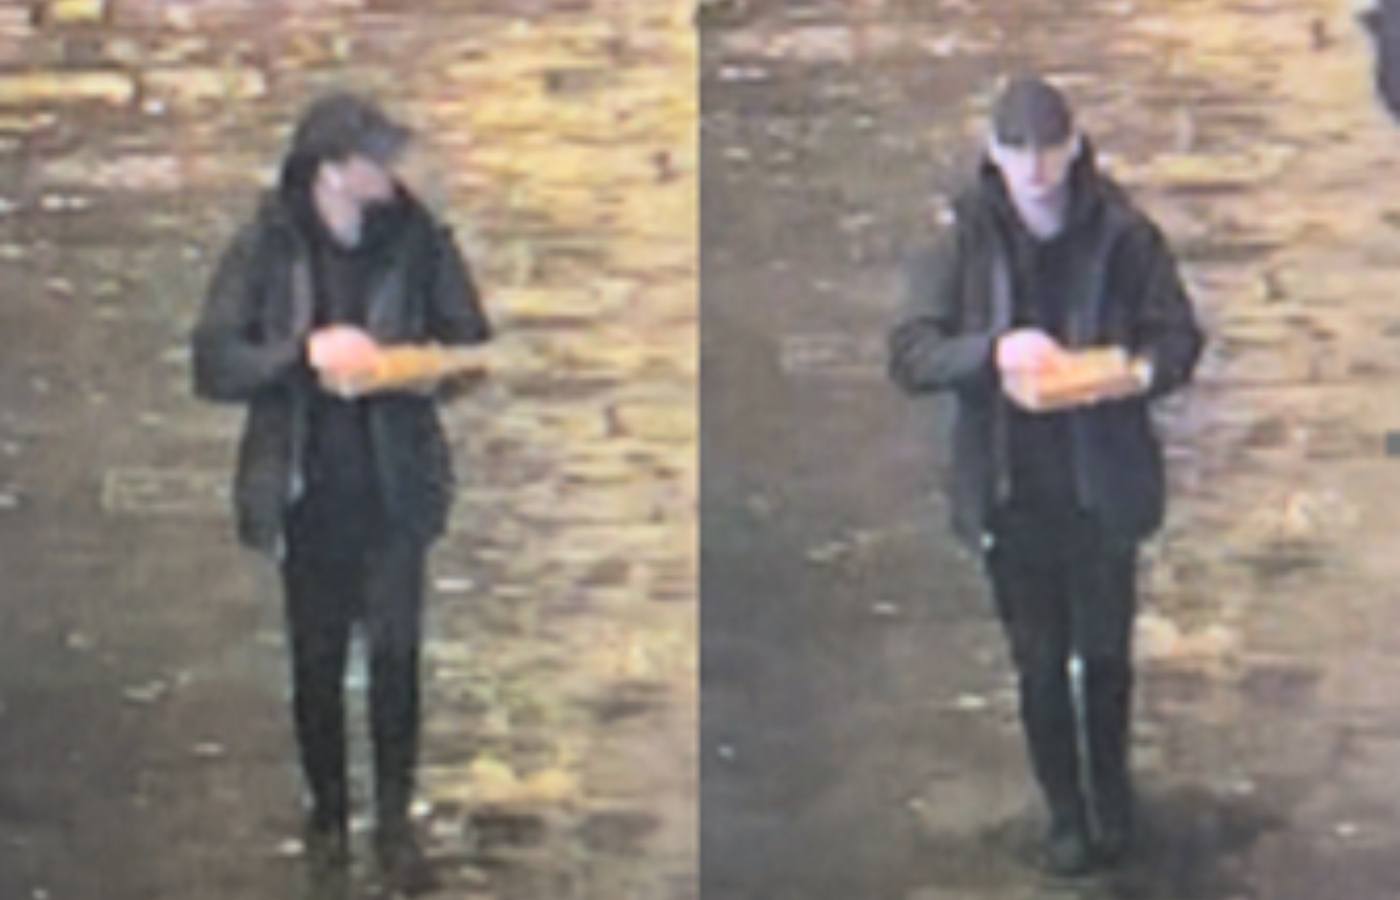 Police are urging the man in the images or anyone who has information on his identity to contact them.